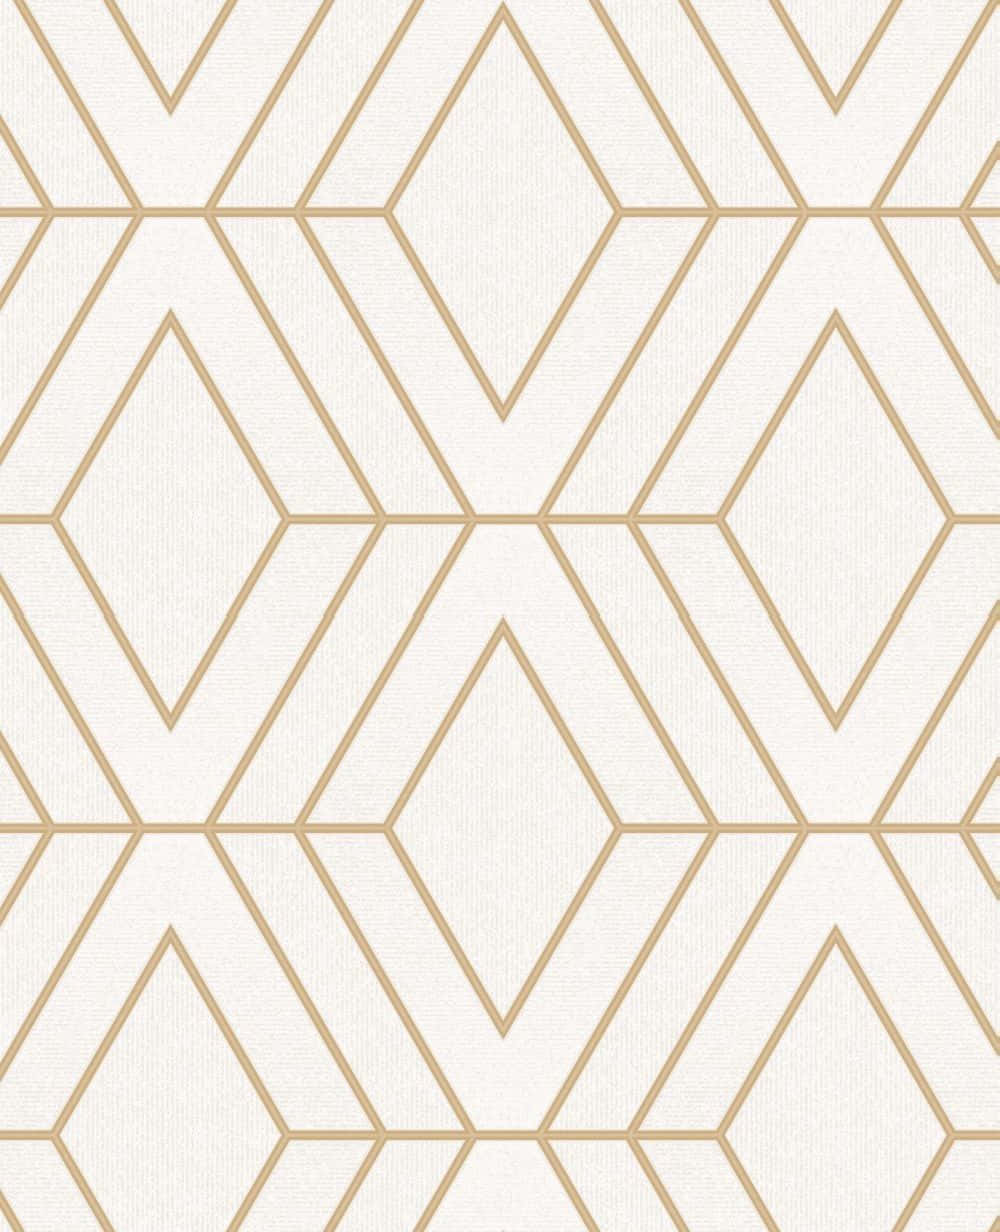 Contrasting shades of light – elegance and sophistication brought together in this gold and white background.